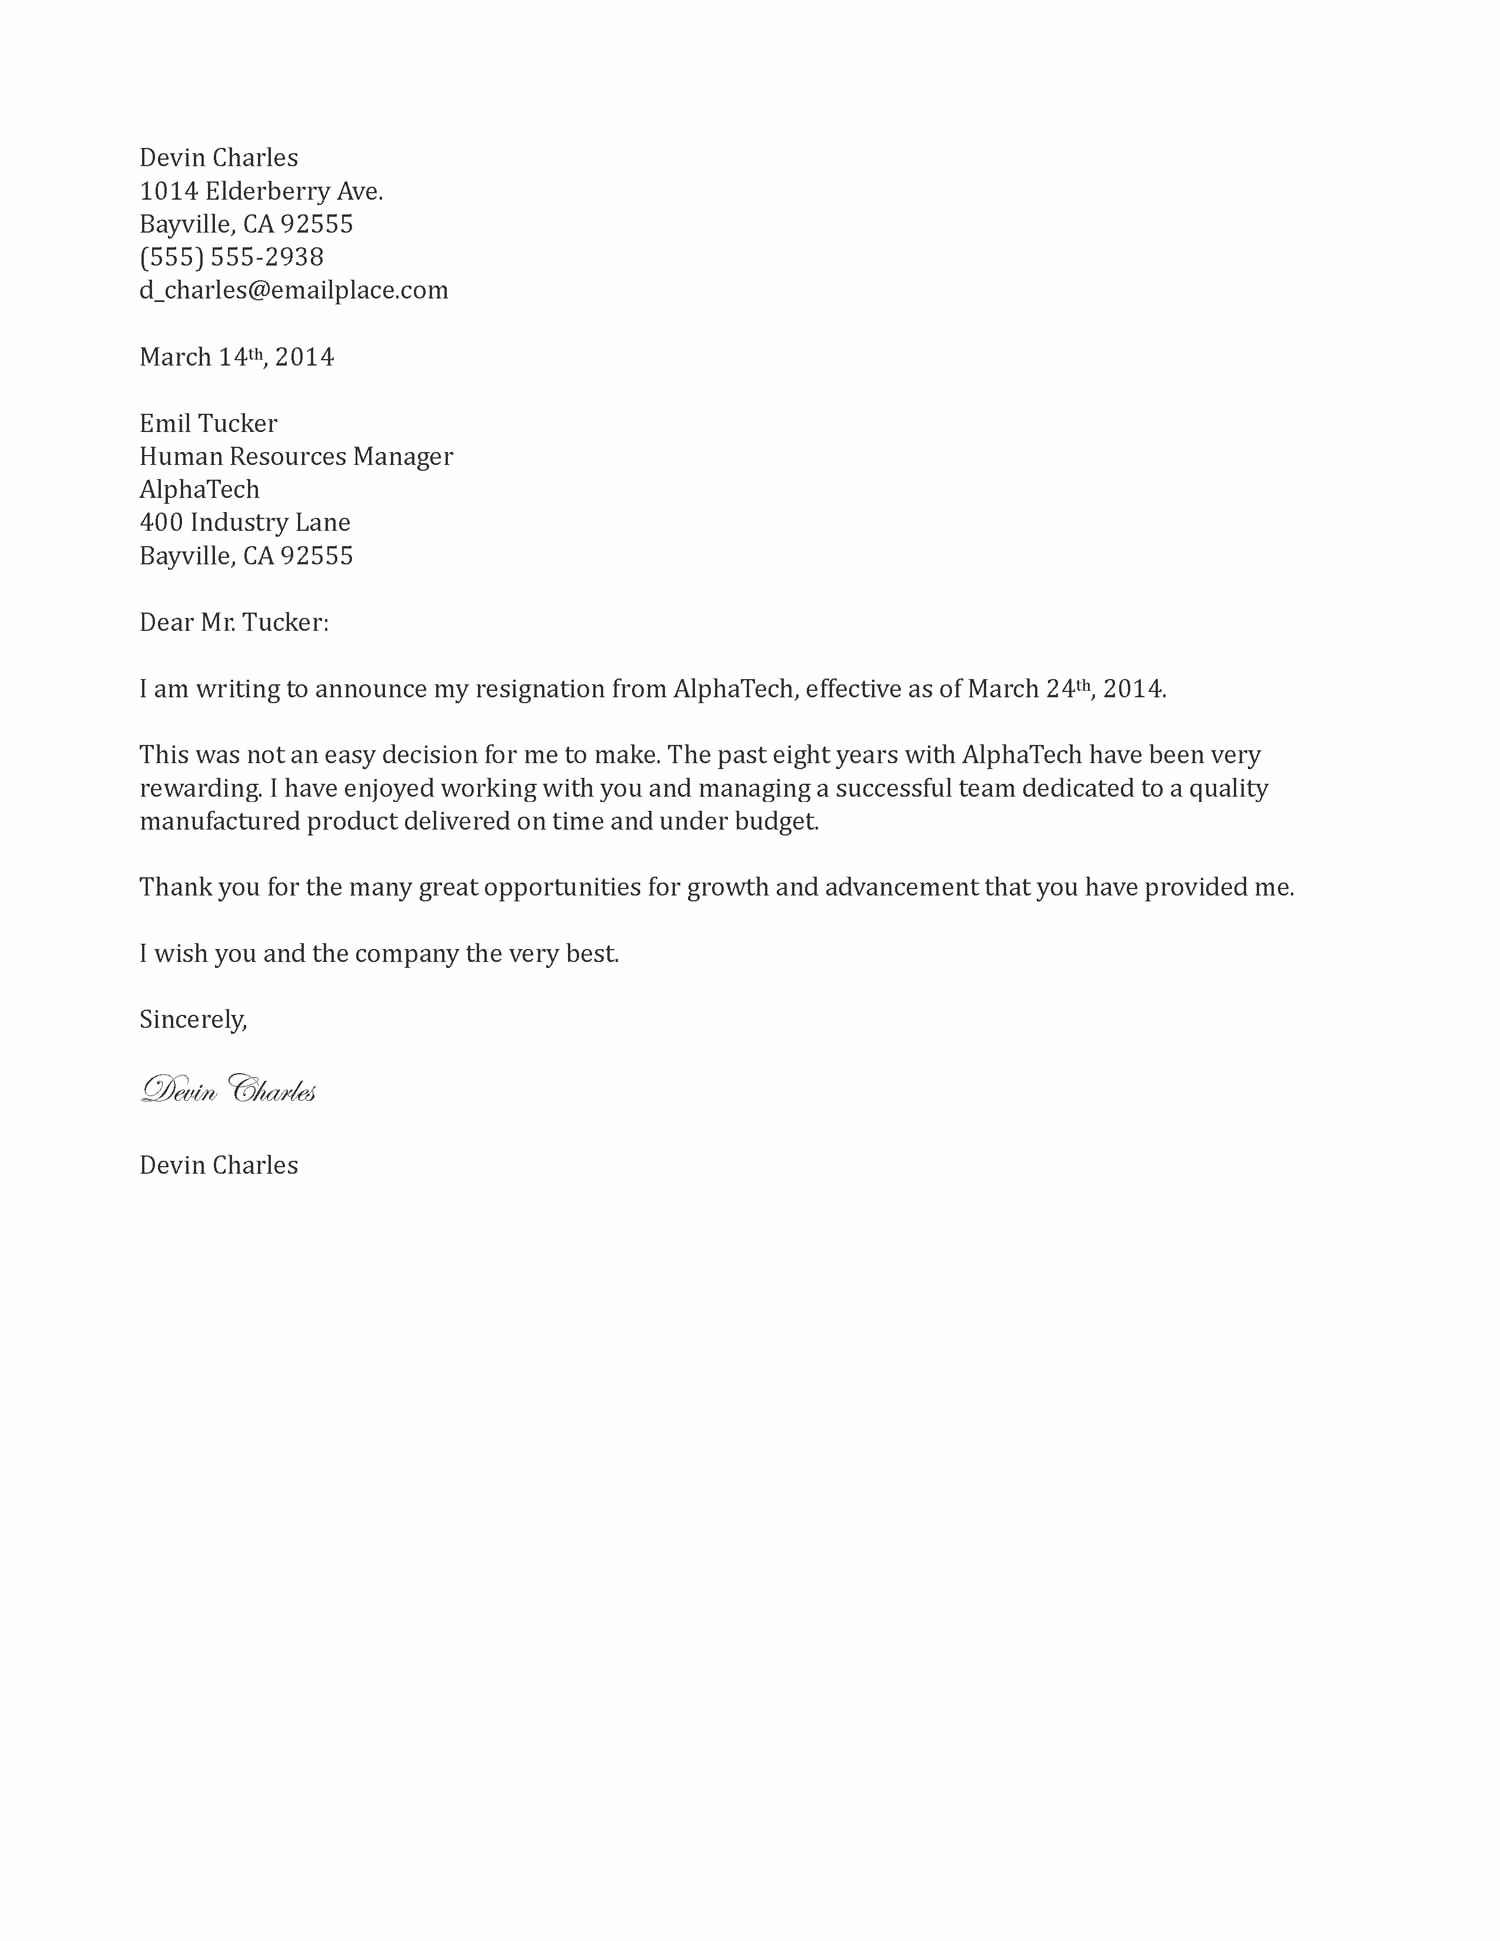 Letter Of Resignation Template Free Luxury Resignation Letter Example Twowriting A Letter